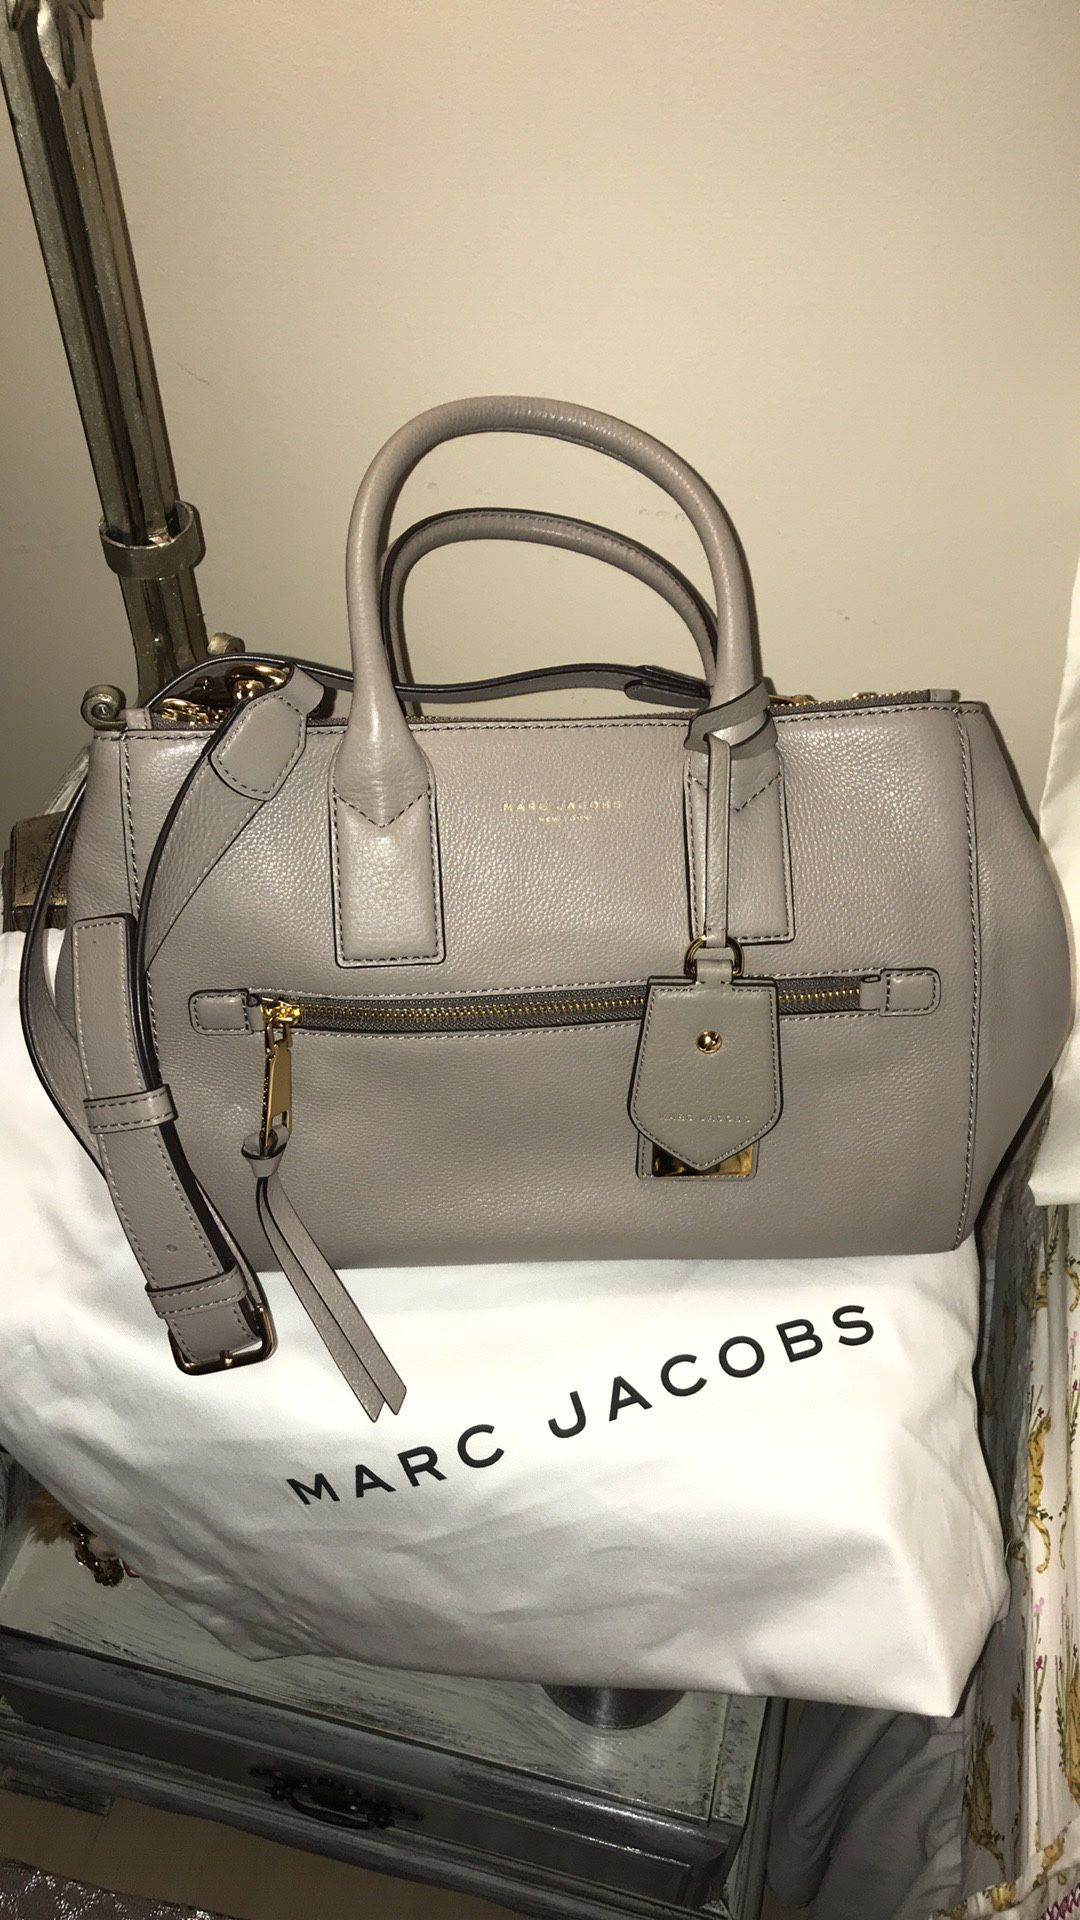 Marc Jacobs brand new with tag messenger bag/tote